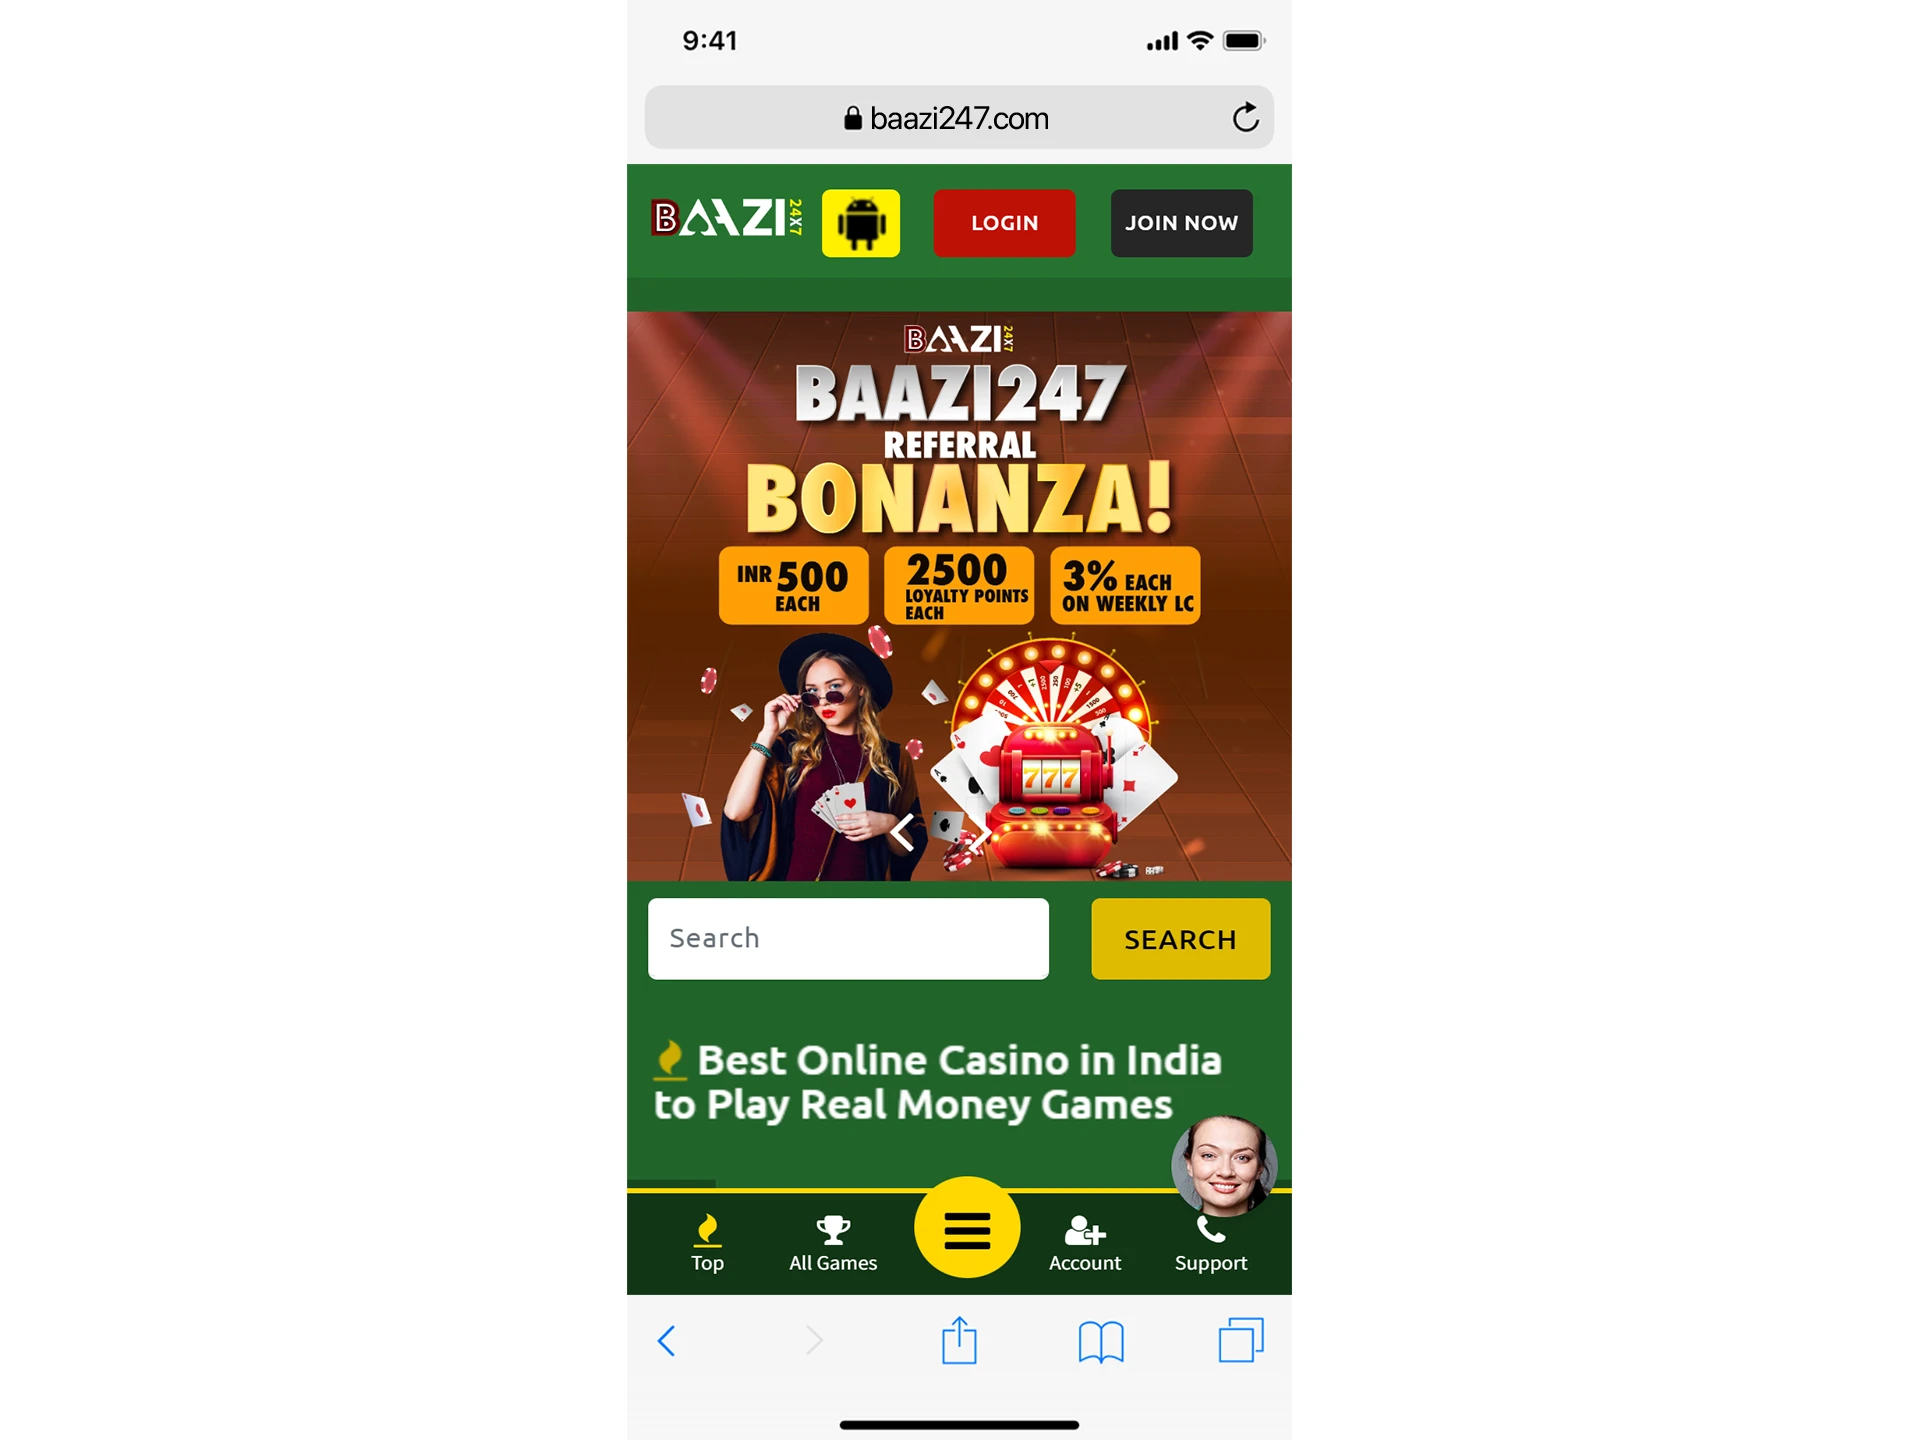 Open the Safari browser on your iOS device and go to the Baazi247 website.